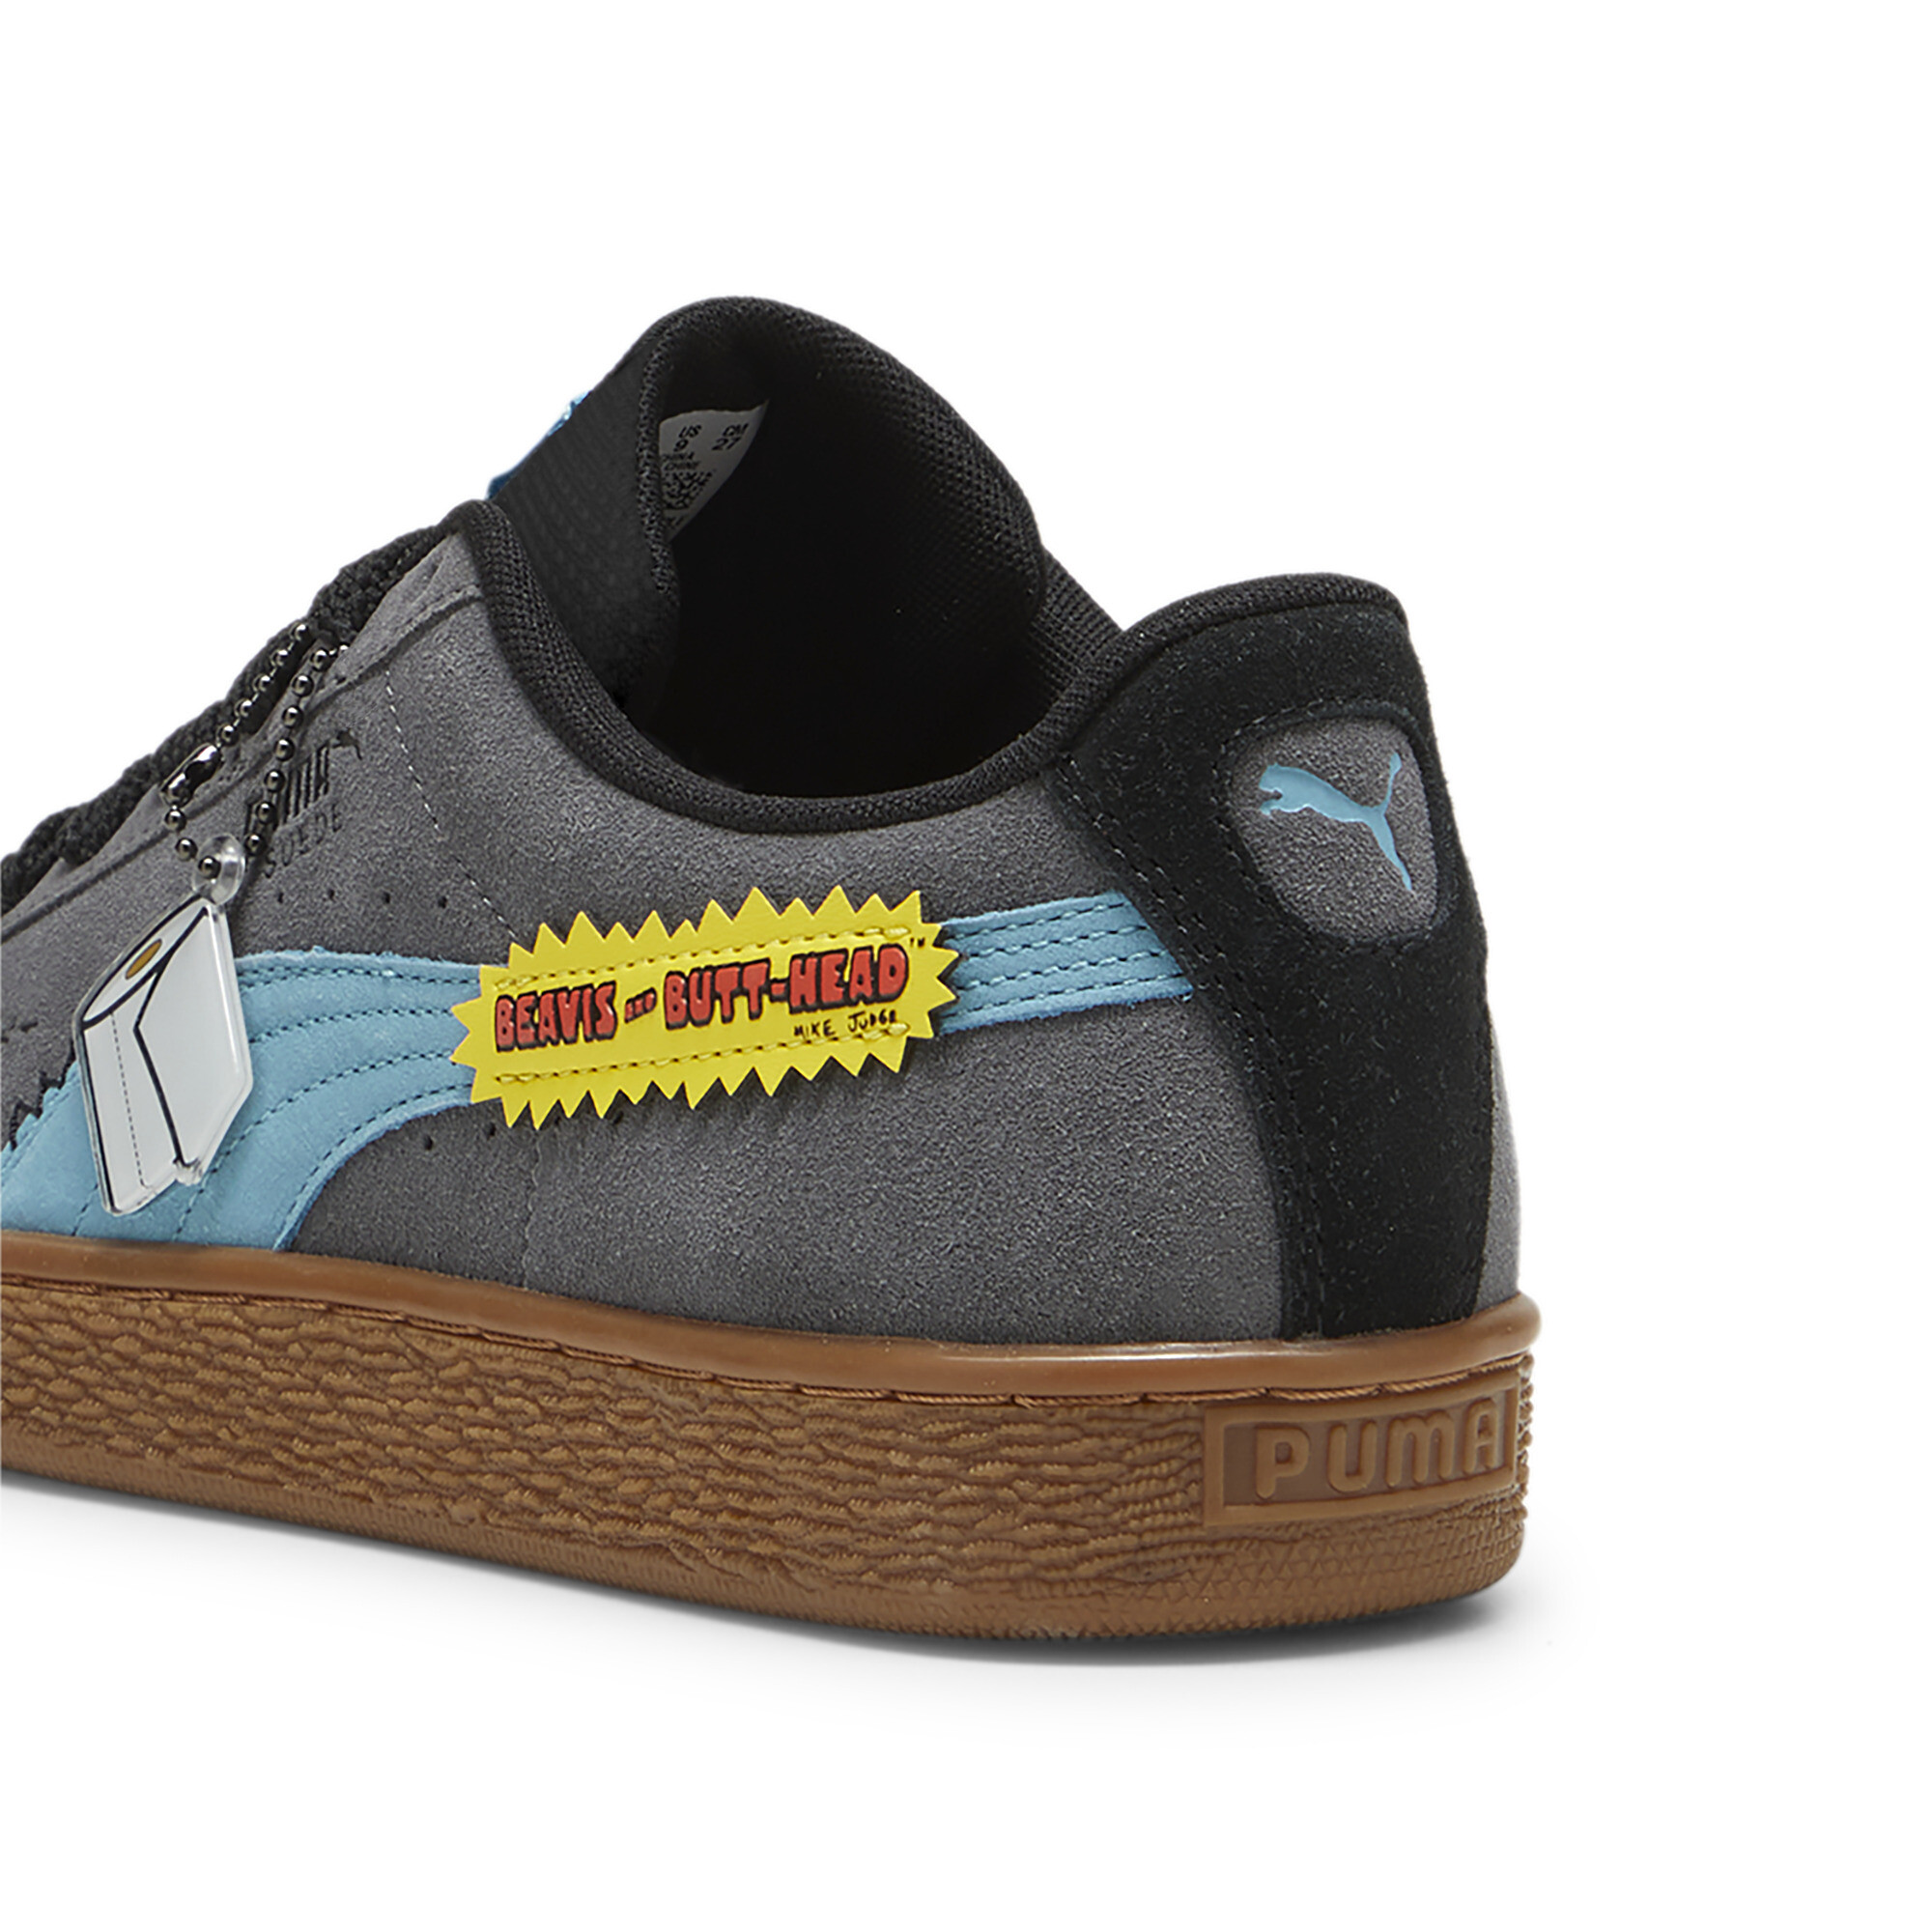 Kids' PUMA X BEAVIS AND BUTTHEAD Suede Sneakers In Gray, Size EU 44